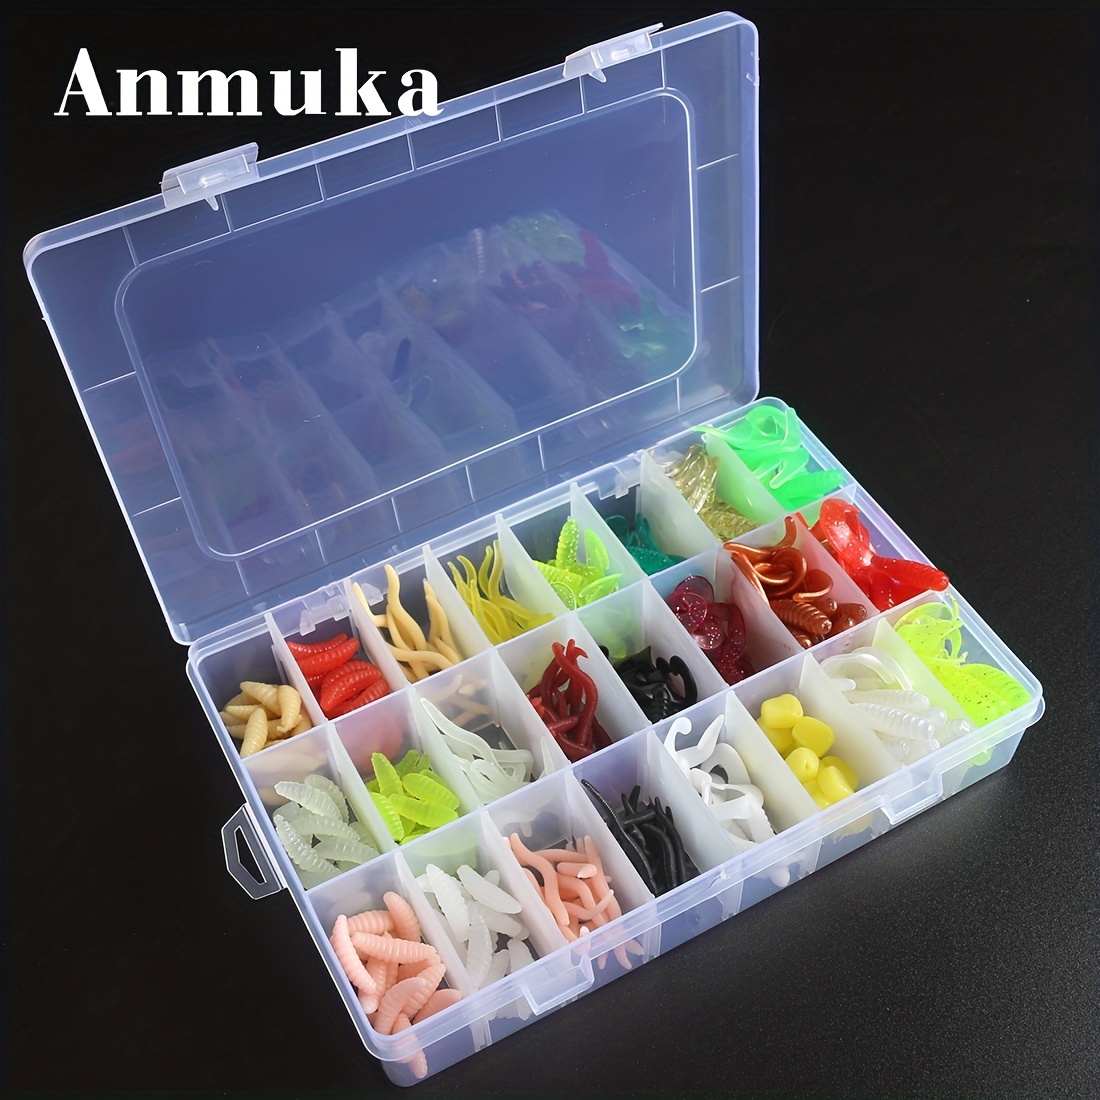 Jammas 20g/Box Fishy Smell Fishing Soft Lures Earthworm Blood Worms Maggots  Sea Worm Artificial Carp Fishing Accessories - (Color: Green Sea Worms)